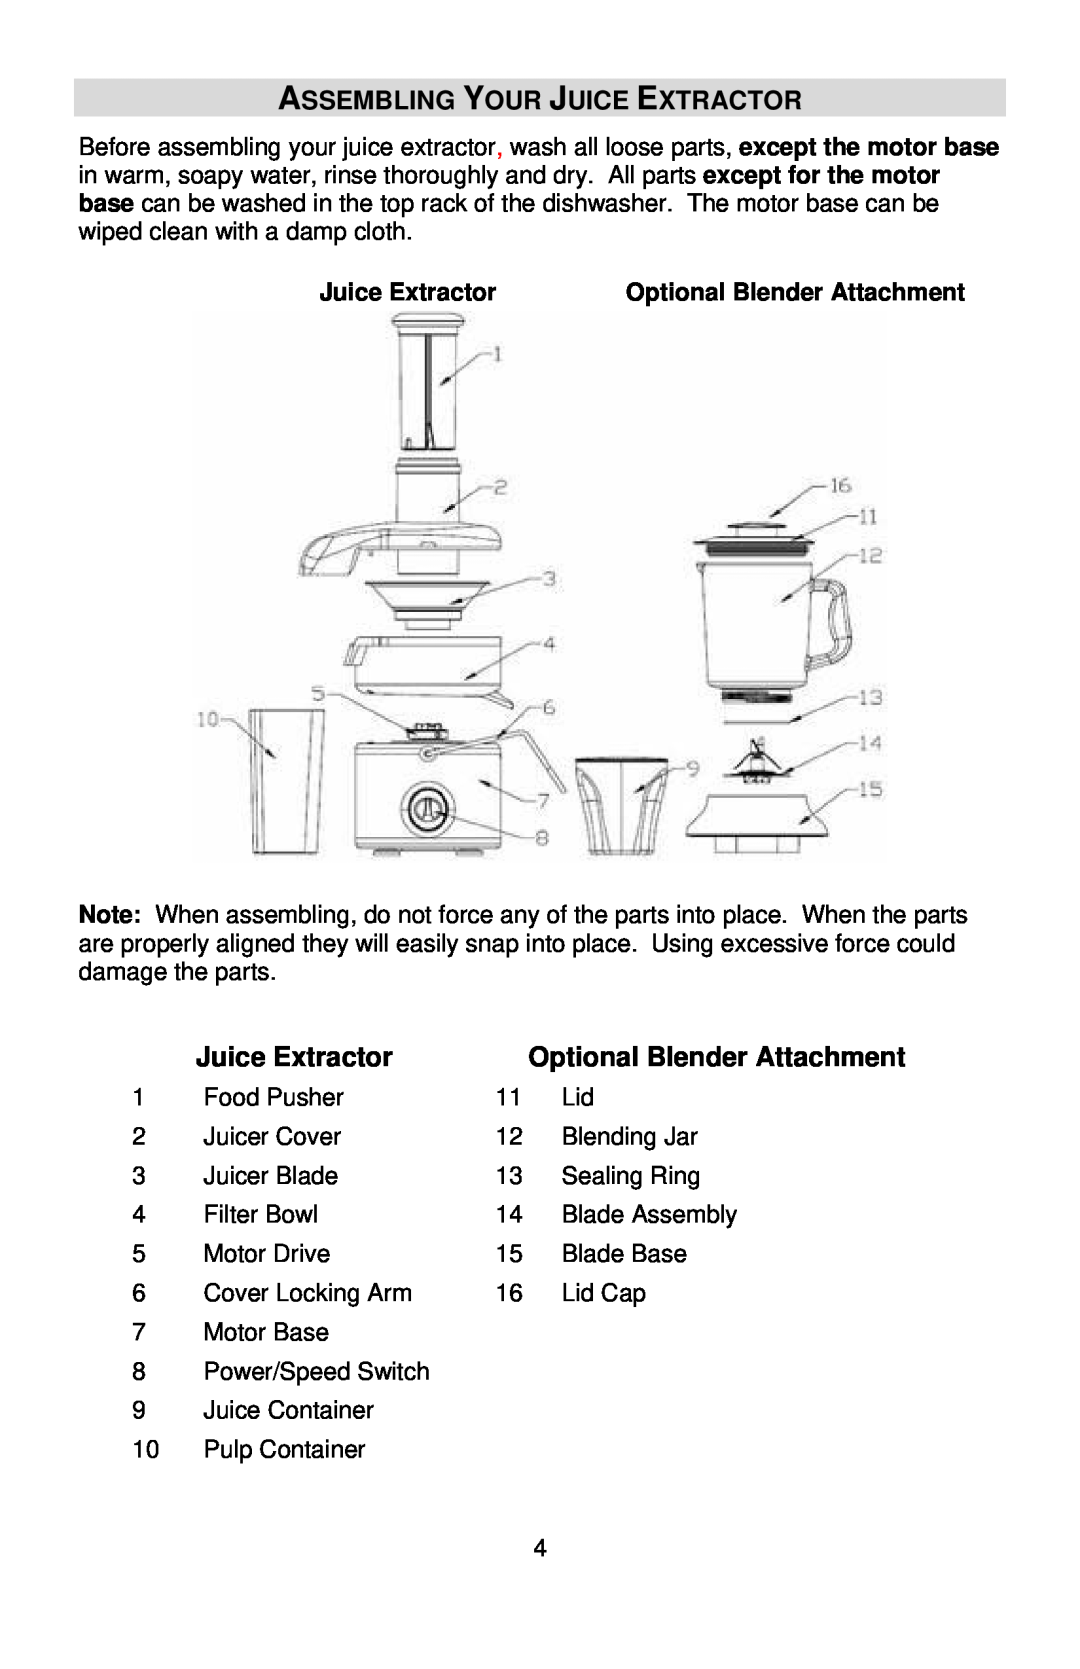 West Bend L5711A, 7000 instruction manual Assembling Your Juice Extractor, Optional Blender Attachment 